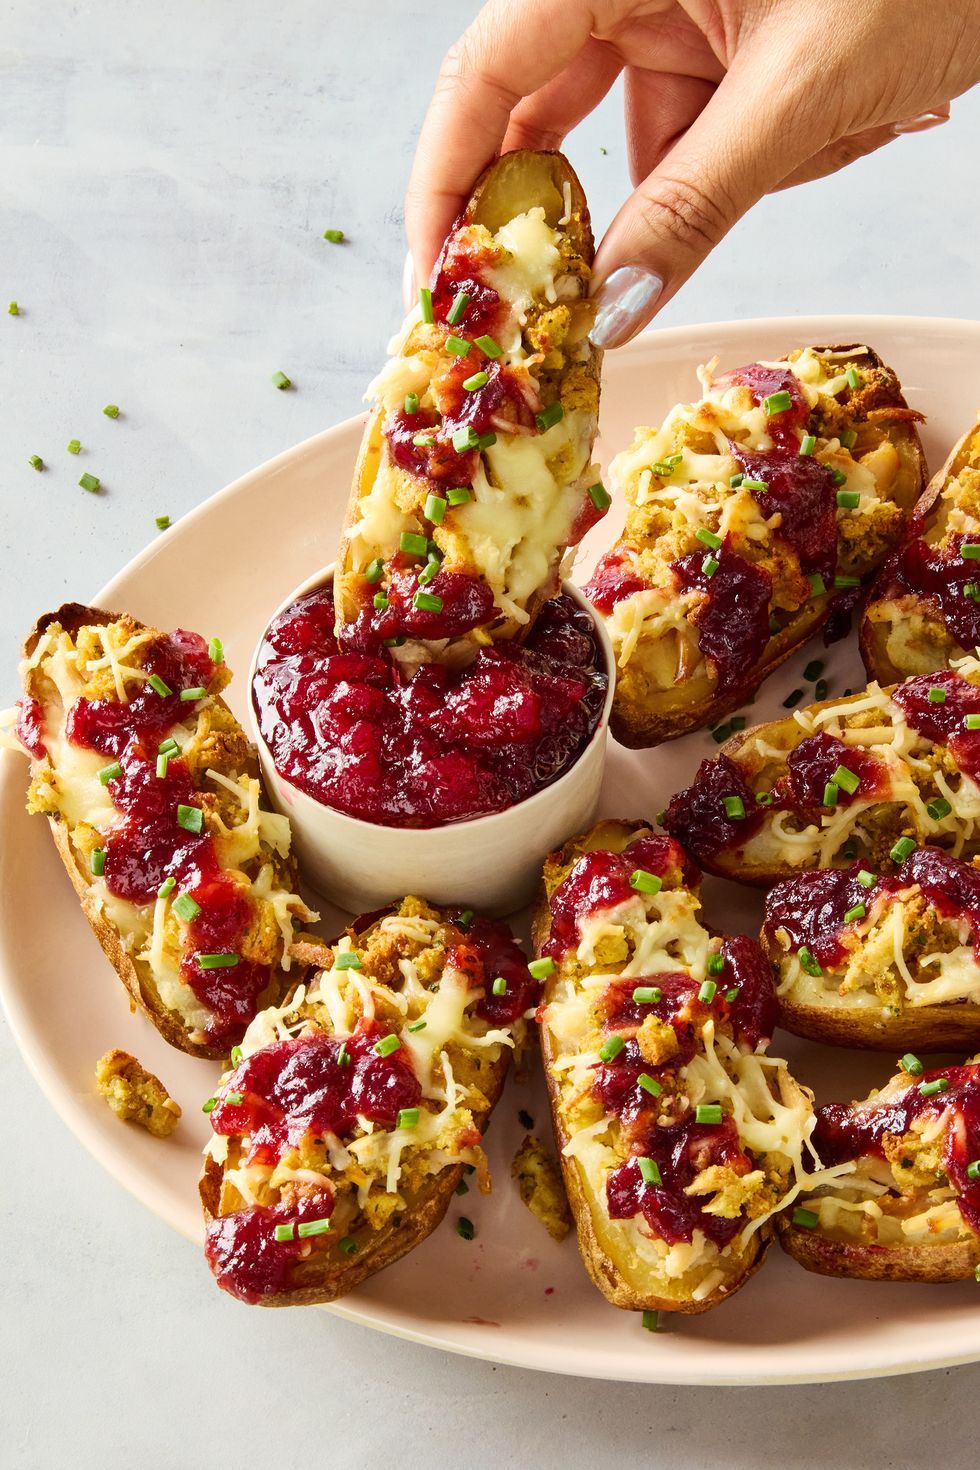 potato skins stuffed with mashed potatoes, stuffing, turkey, and topped with cranberry sauce